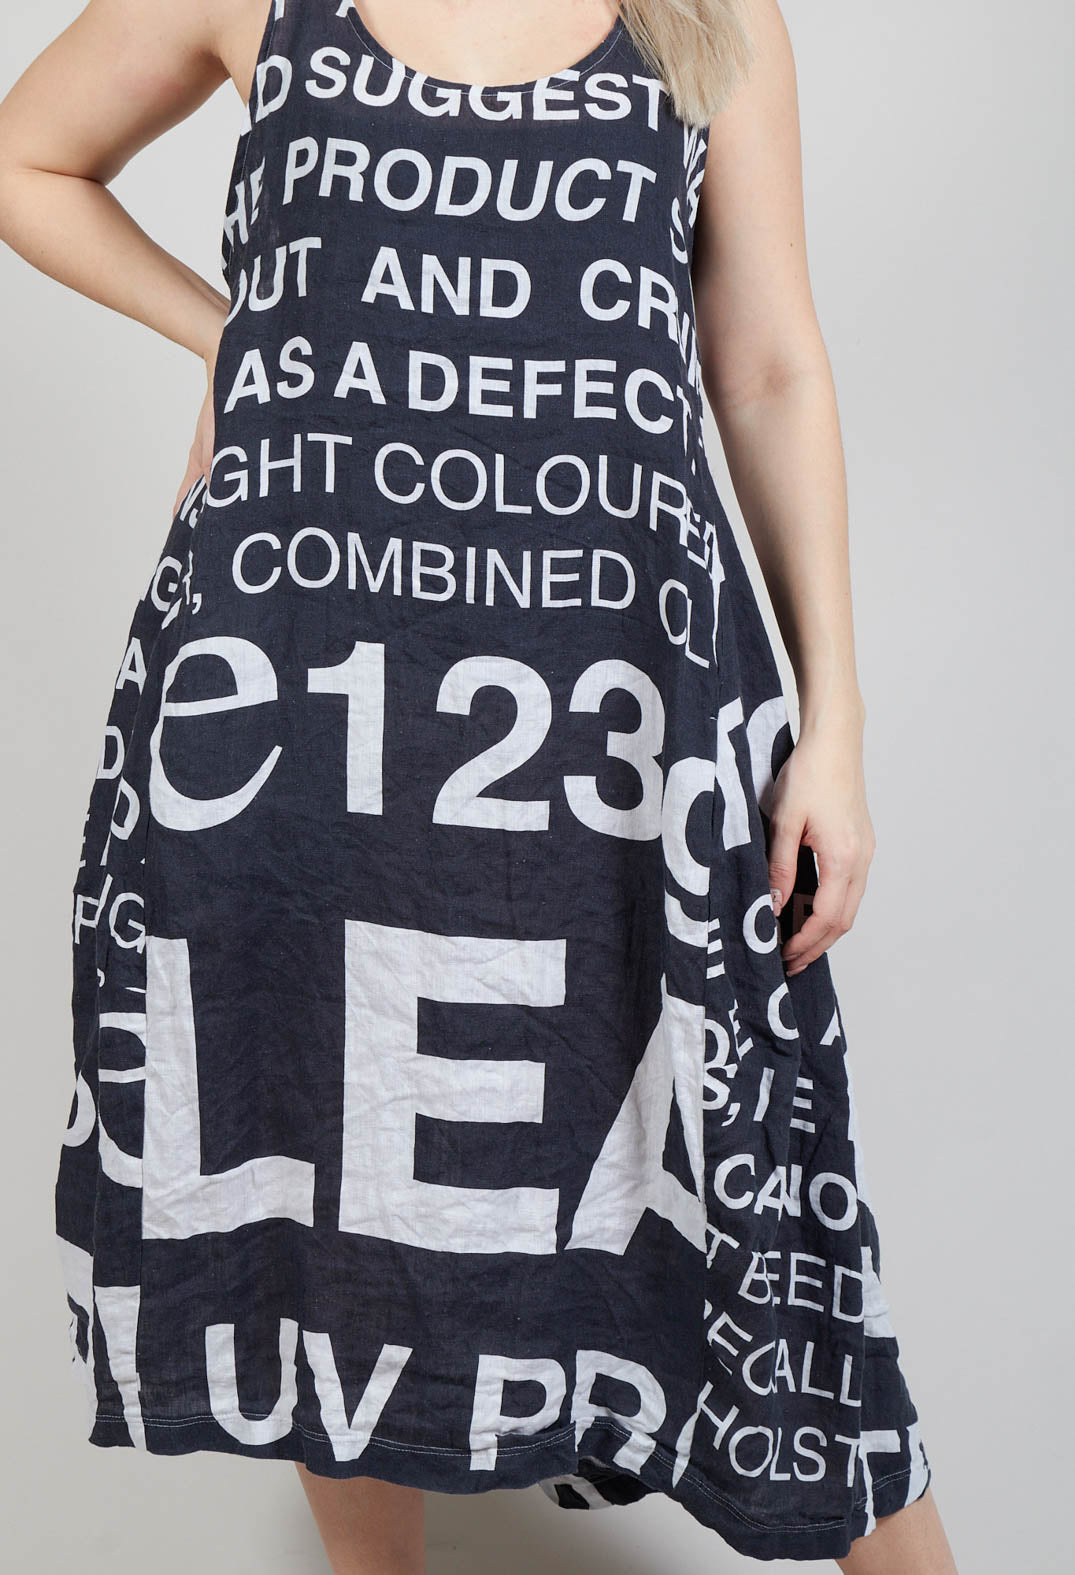 Sleeveless Linen Dress with Large Lettering in Black Print